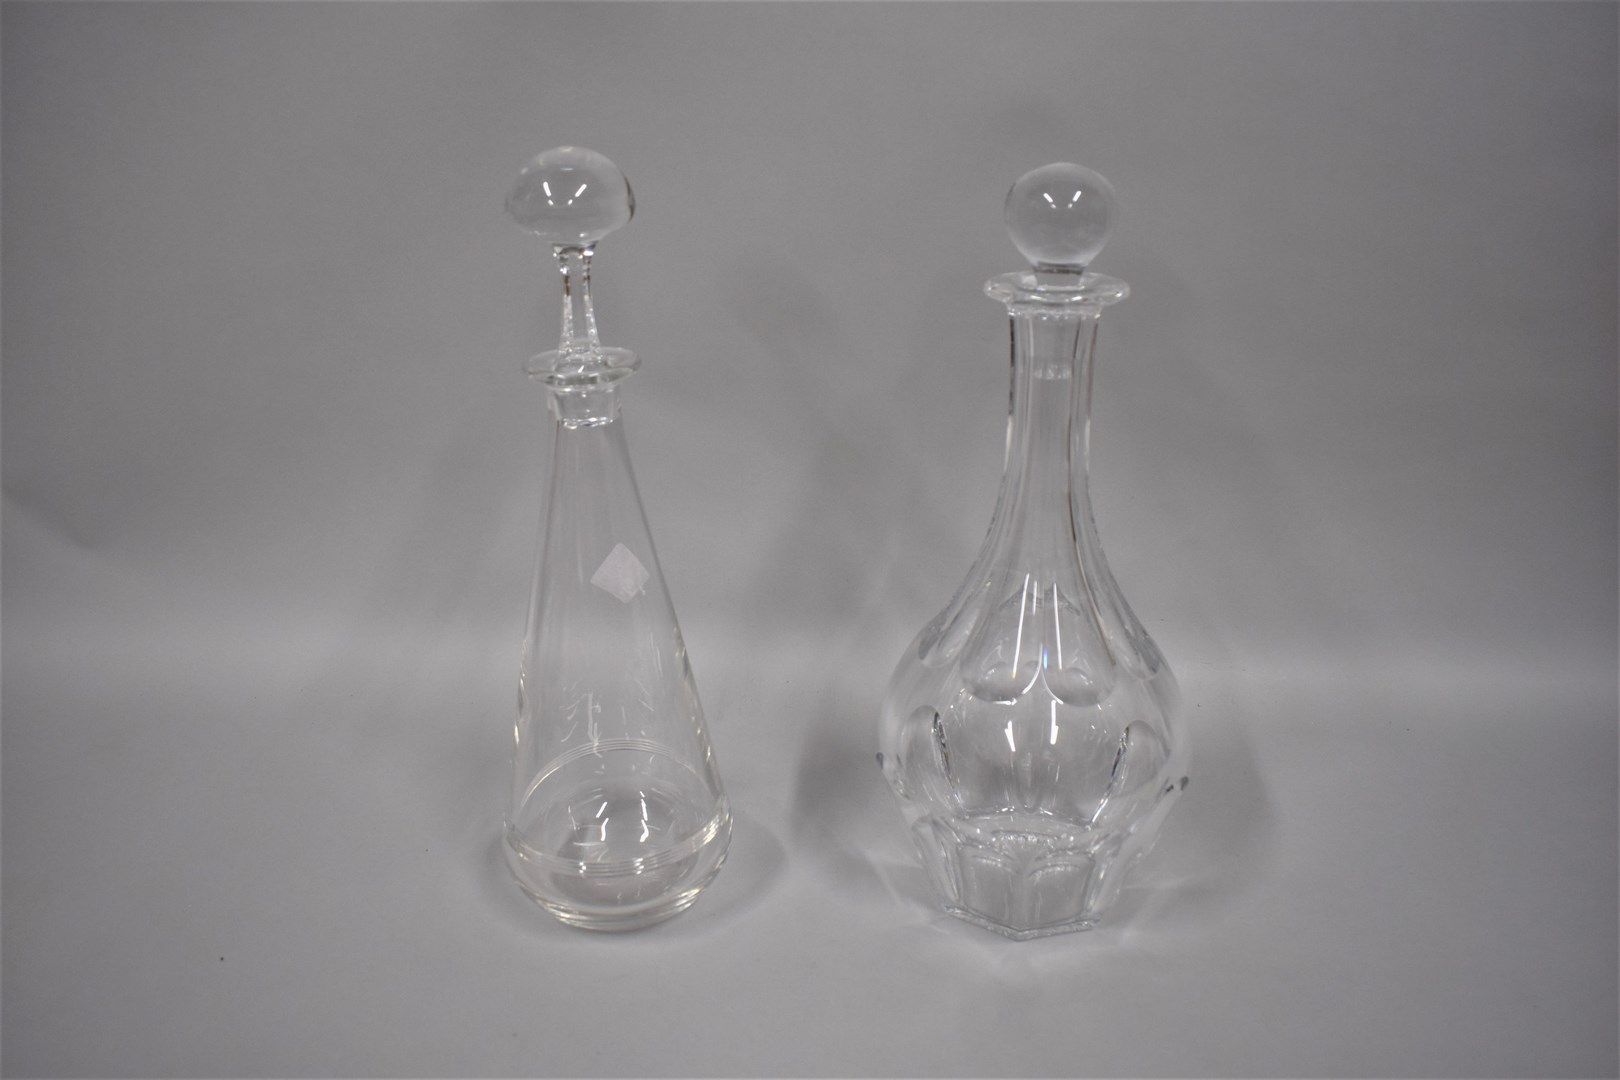 Null BACCARAT

Set of two decanters, one for white wine, the other for water.

H&hellip;